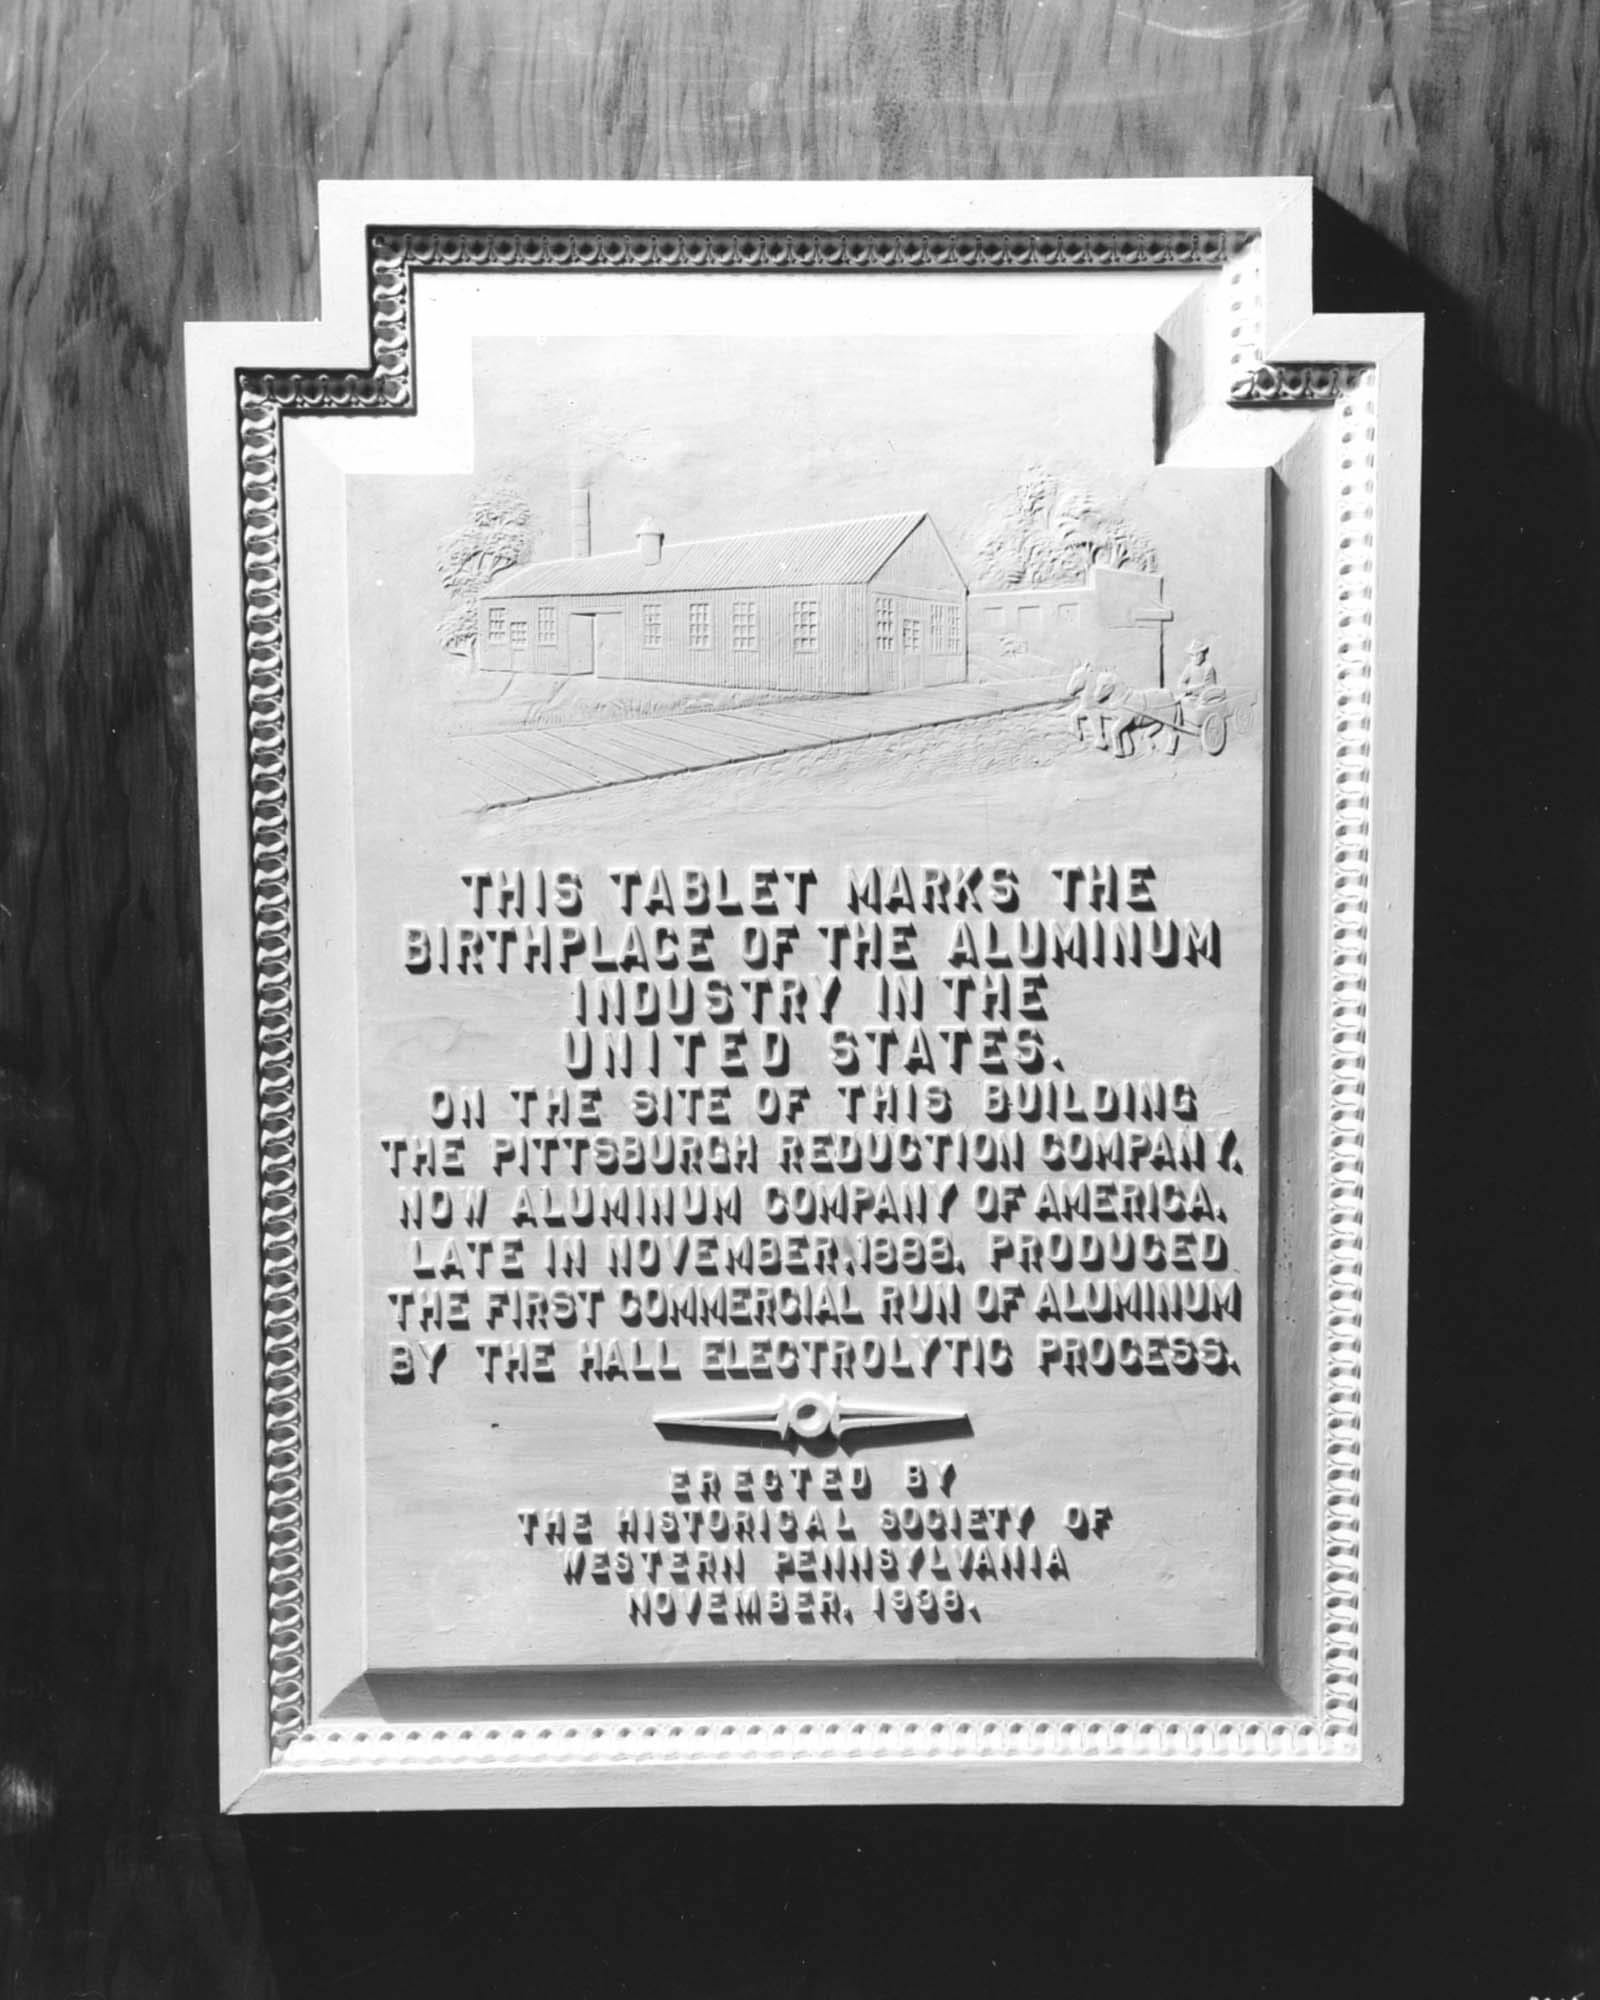 Historical Plaque for the Birthplace of Alumninum Industry